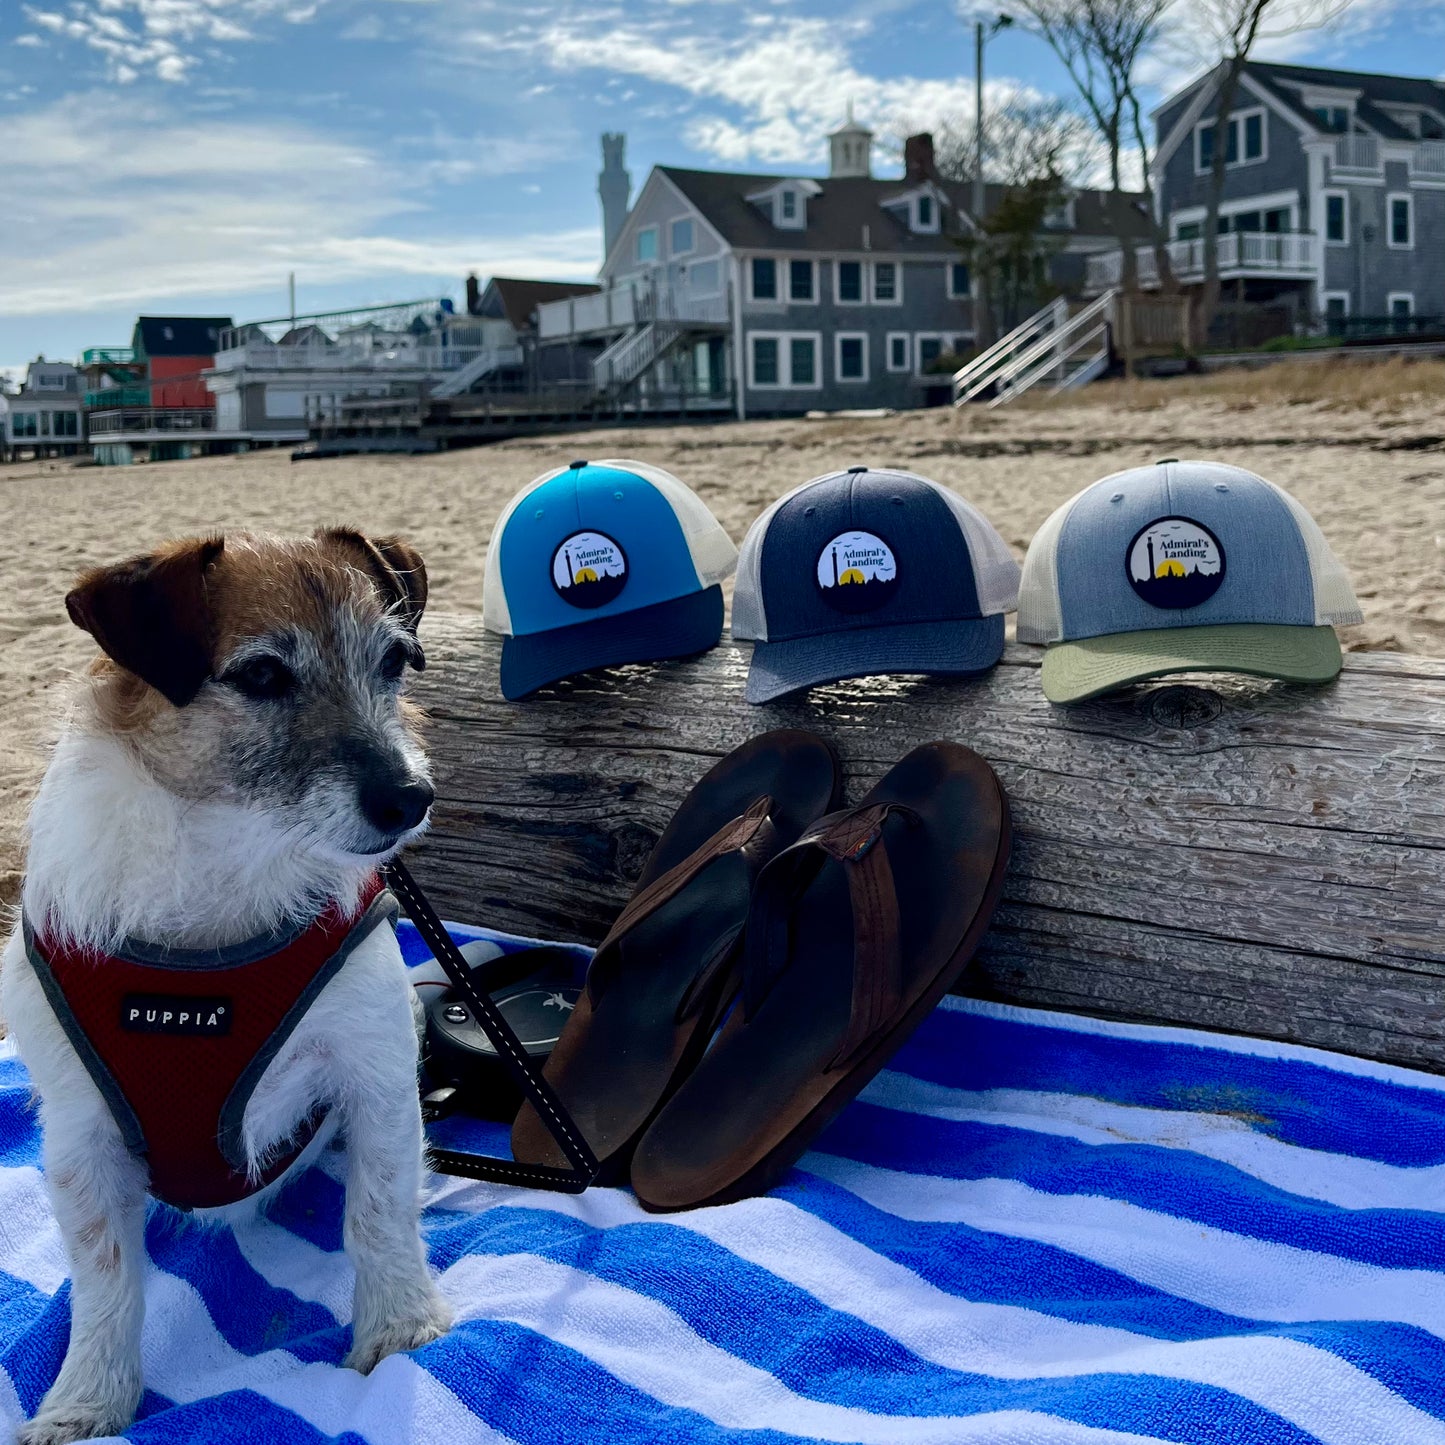 PTown Patch Hats